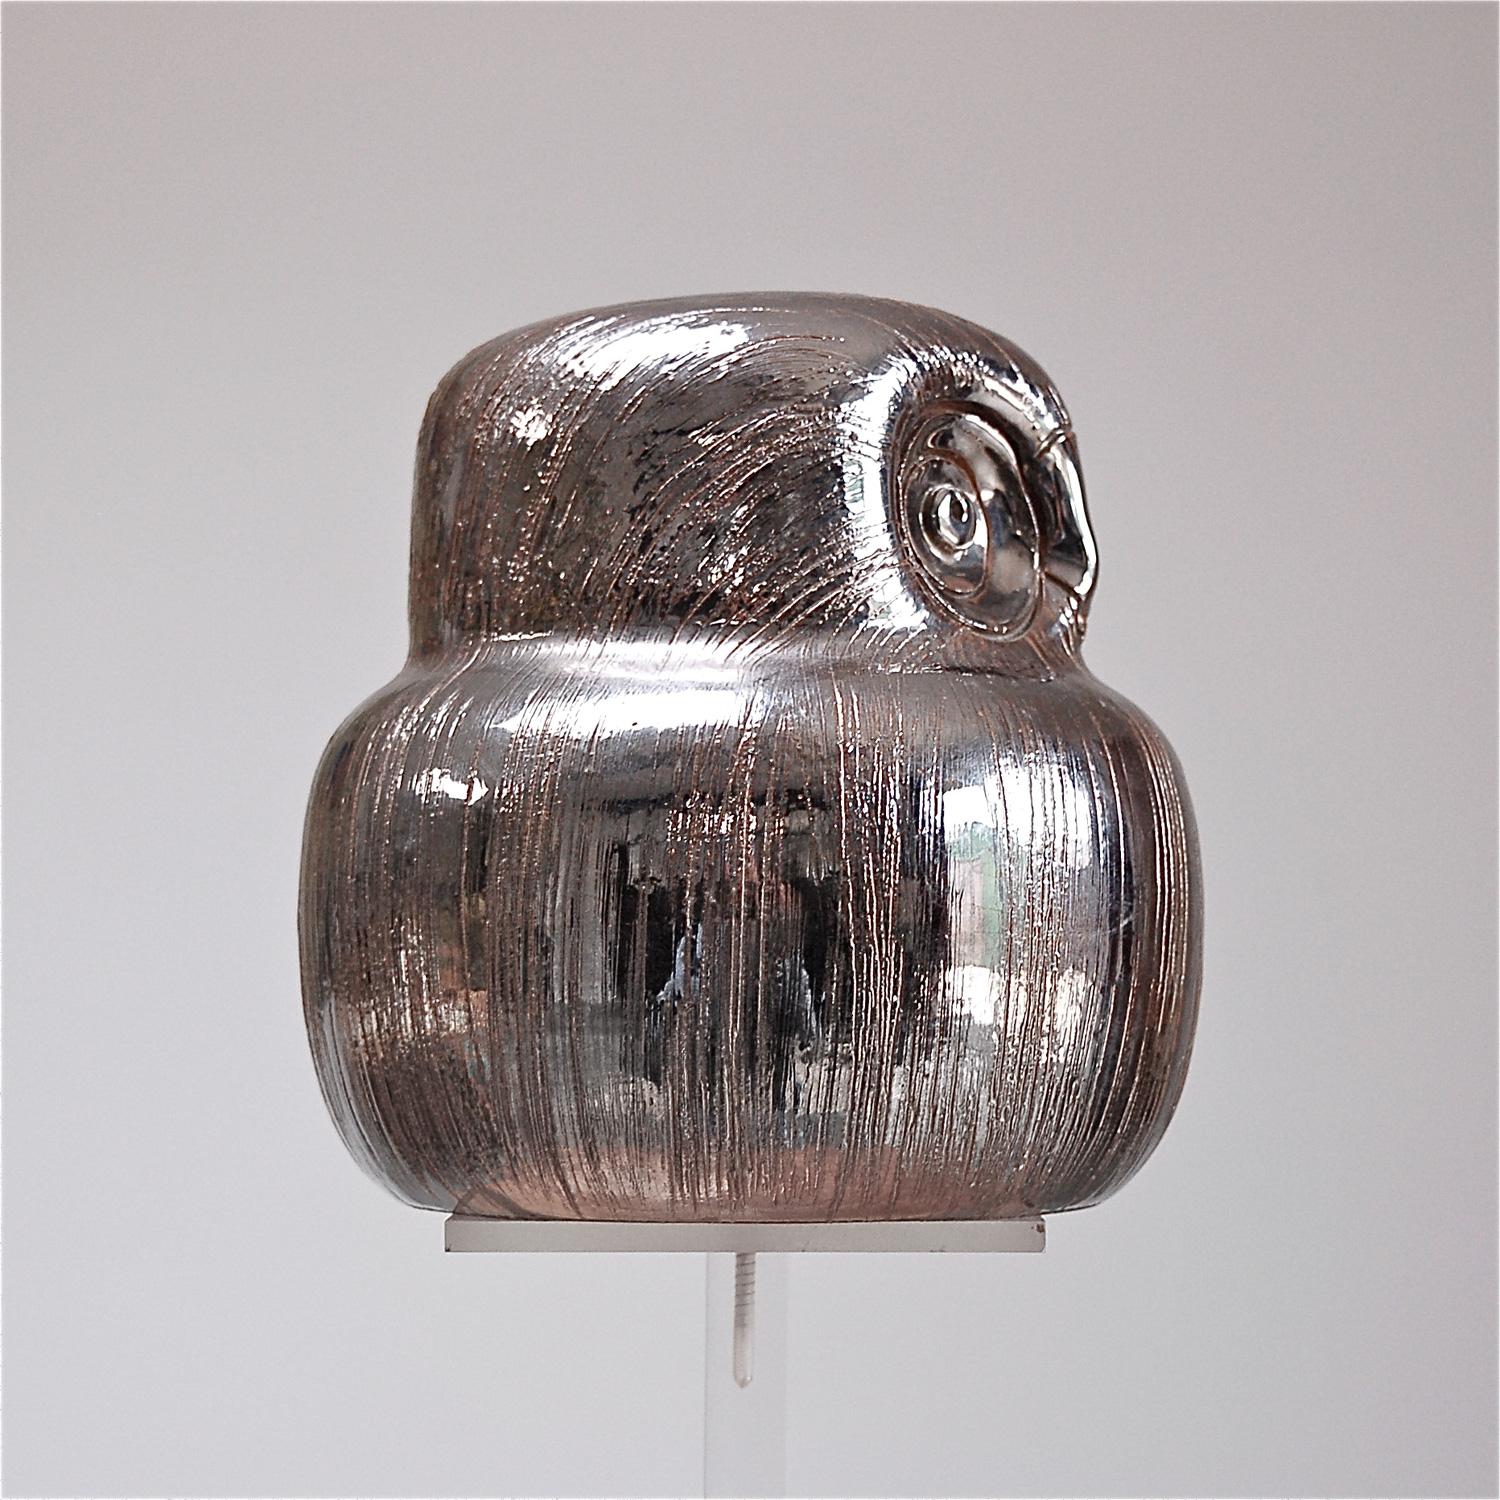 Mid-Century Modern Ceramic Owl Sculpture in Silver Glaze by Aldo Londi for Bitossi, 1960s Italy For Sale